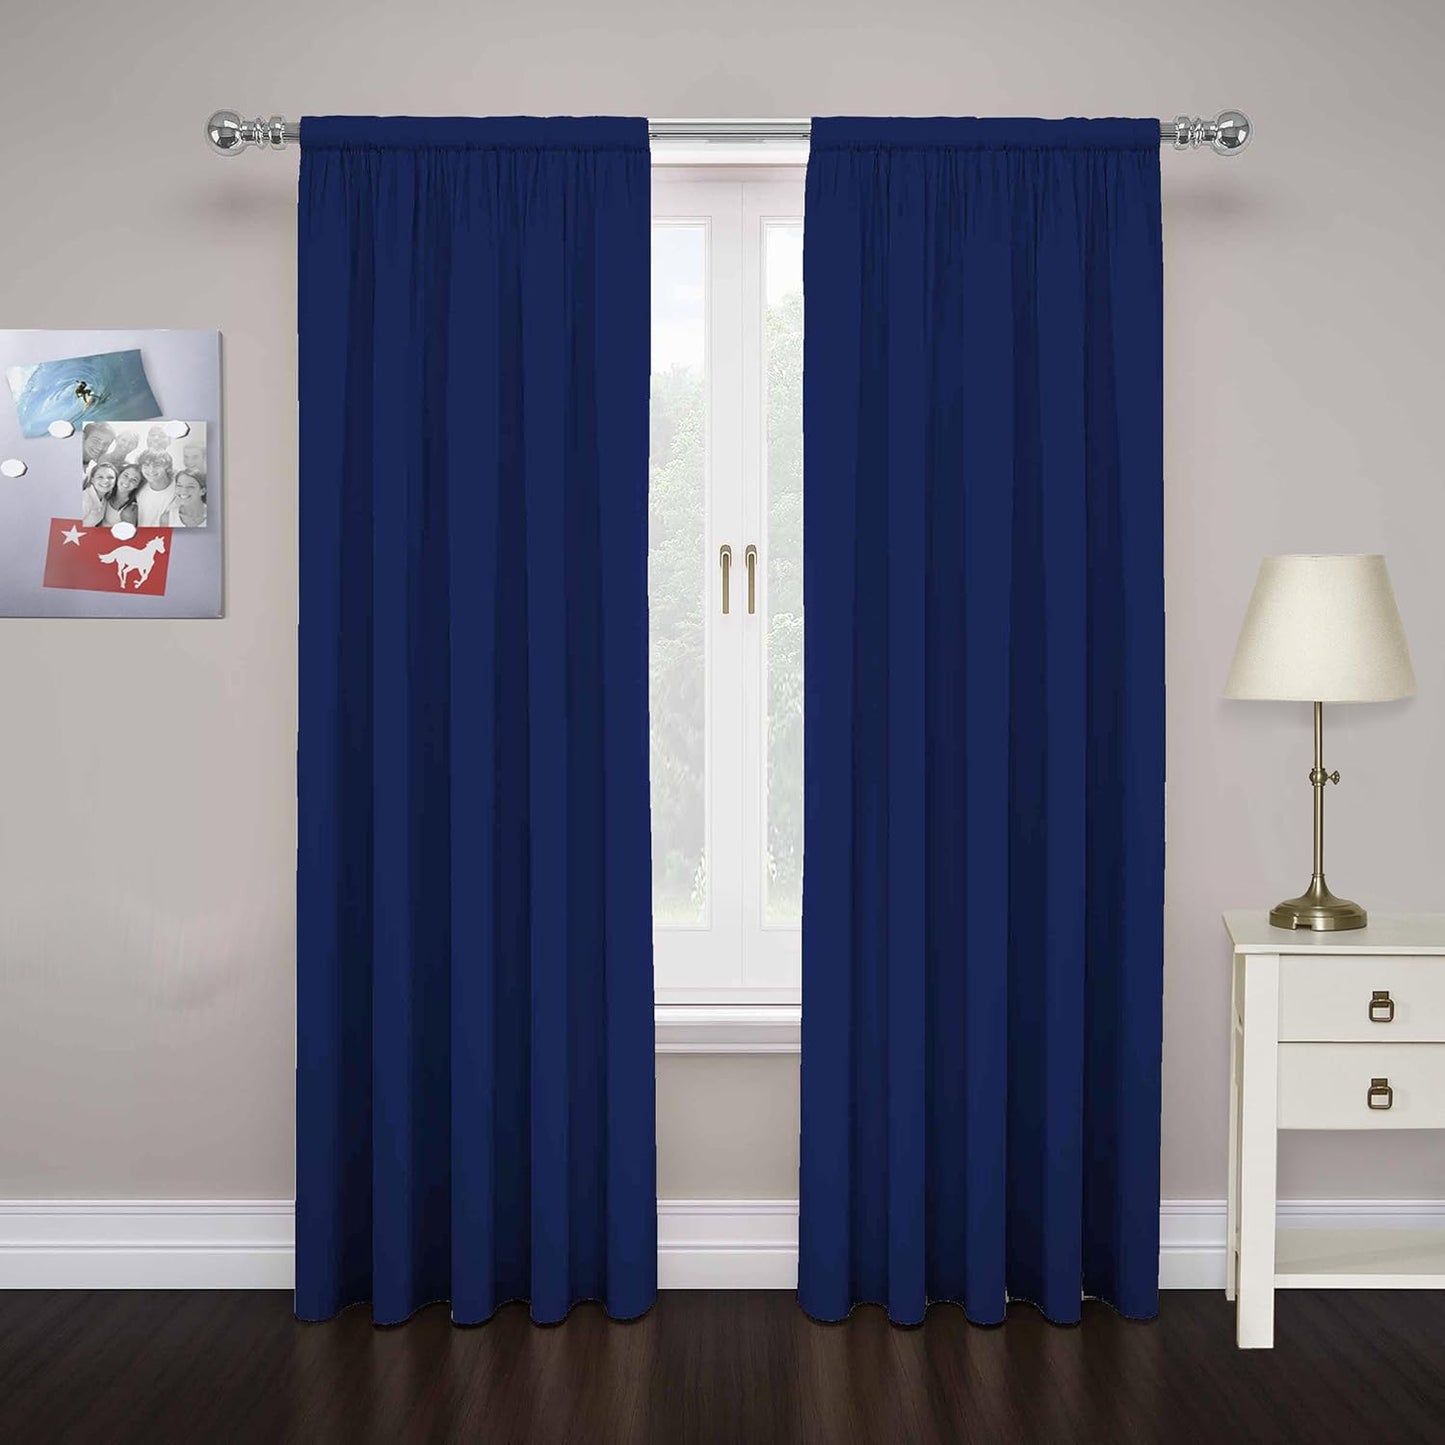 Pairs to Go Cadenza Modern Decorative Rod Pocket Window Curtains for Living Room (2 Panels), 40 in X 84 In, Teal  Keeco LLC Navy 40 In X 84 In 